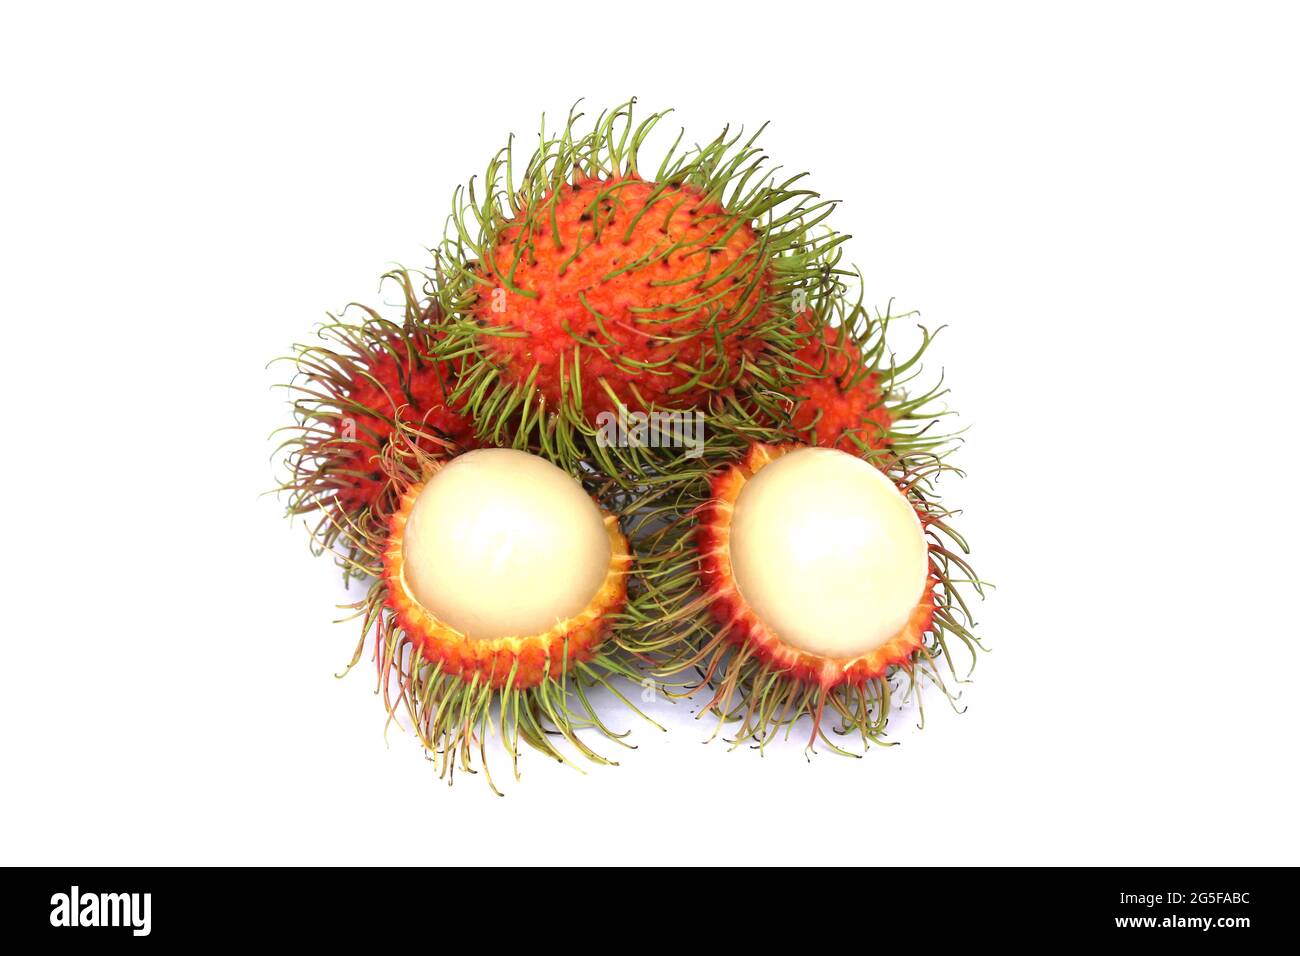 Rambutan, a popular fruit in Thailand, has a sweet taste, isolated on a white background. Stock Photo